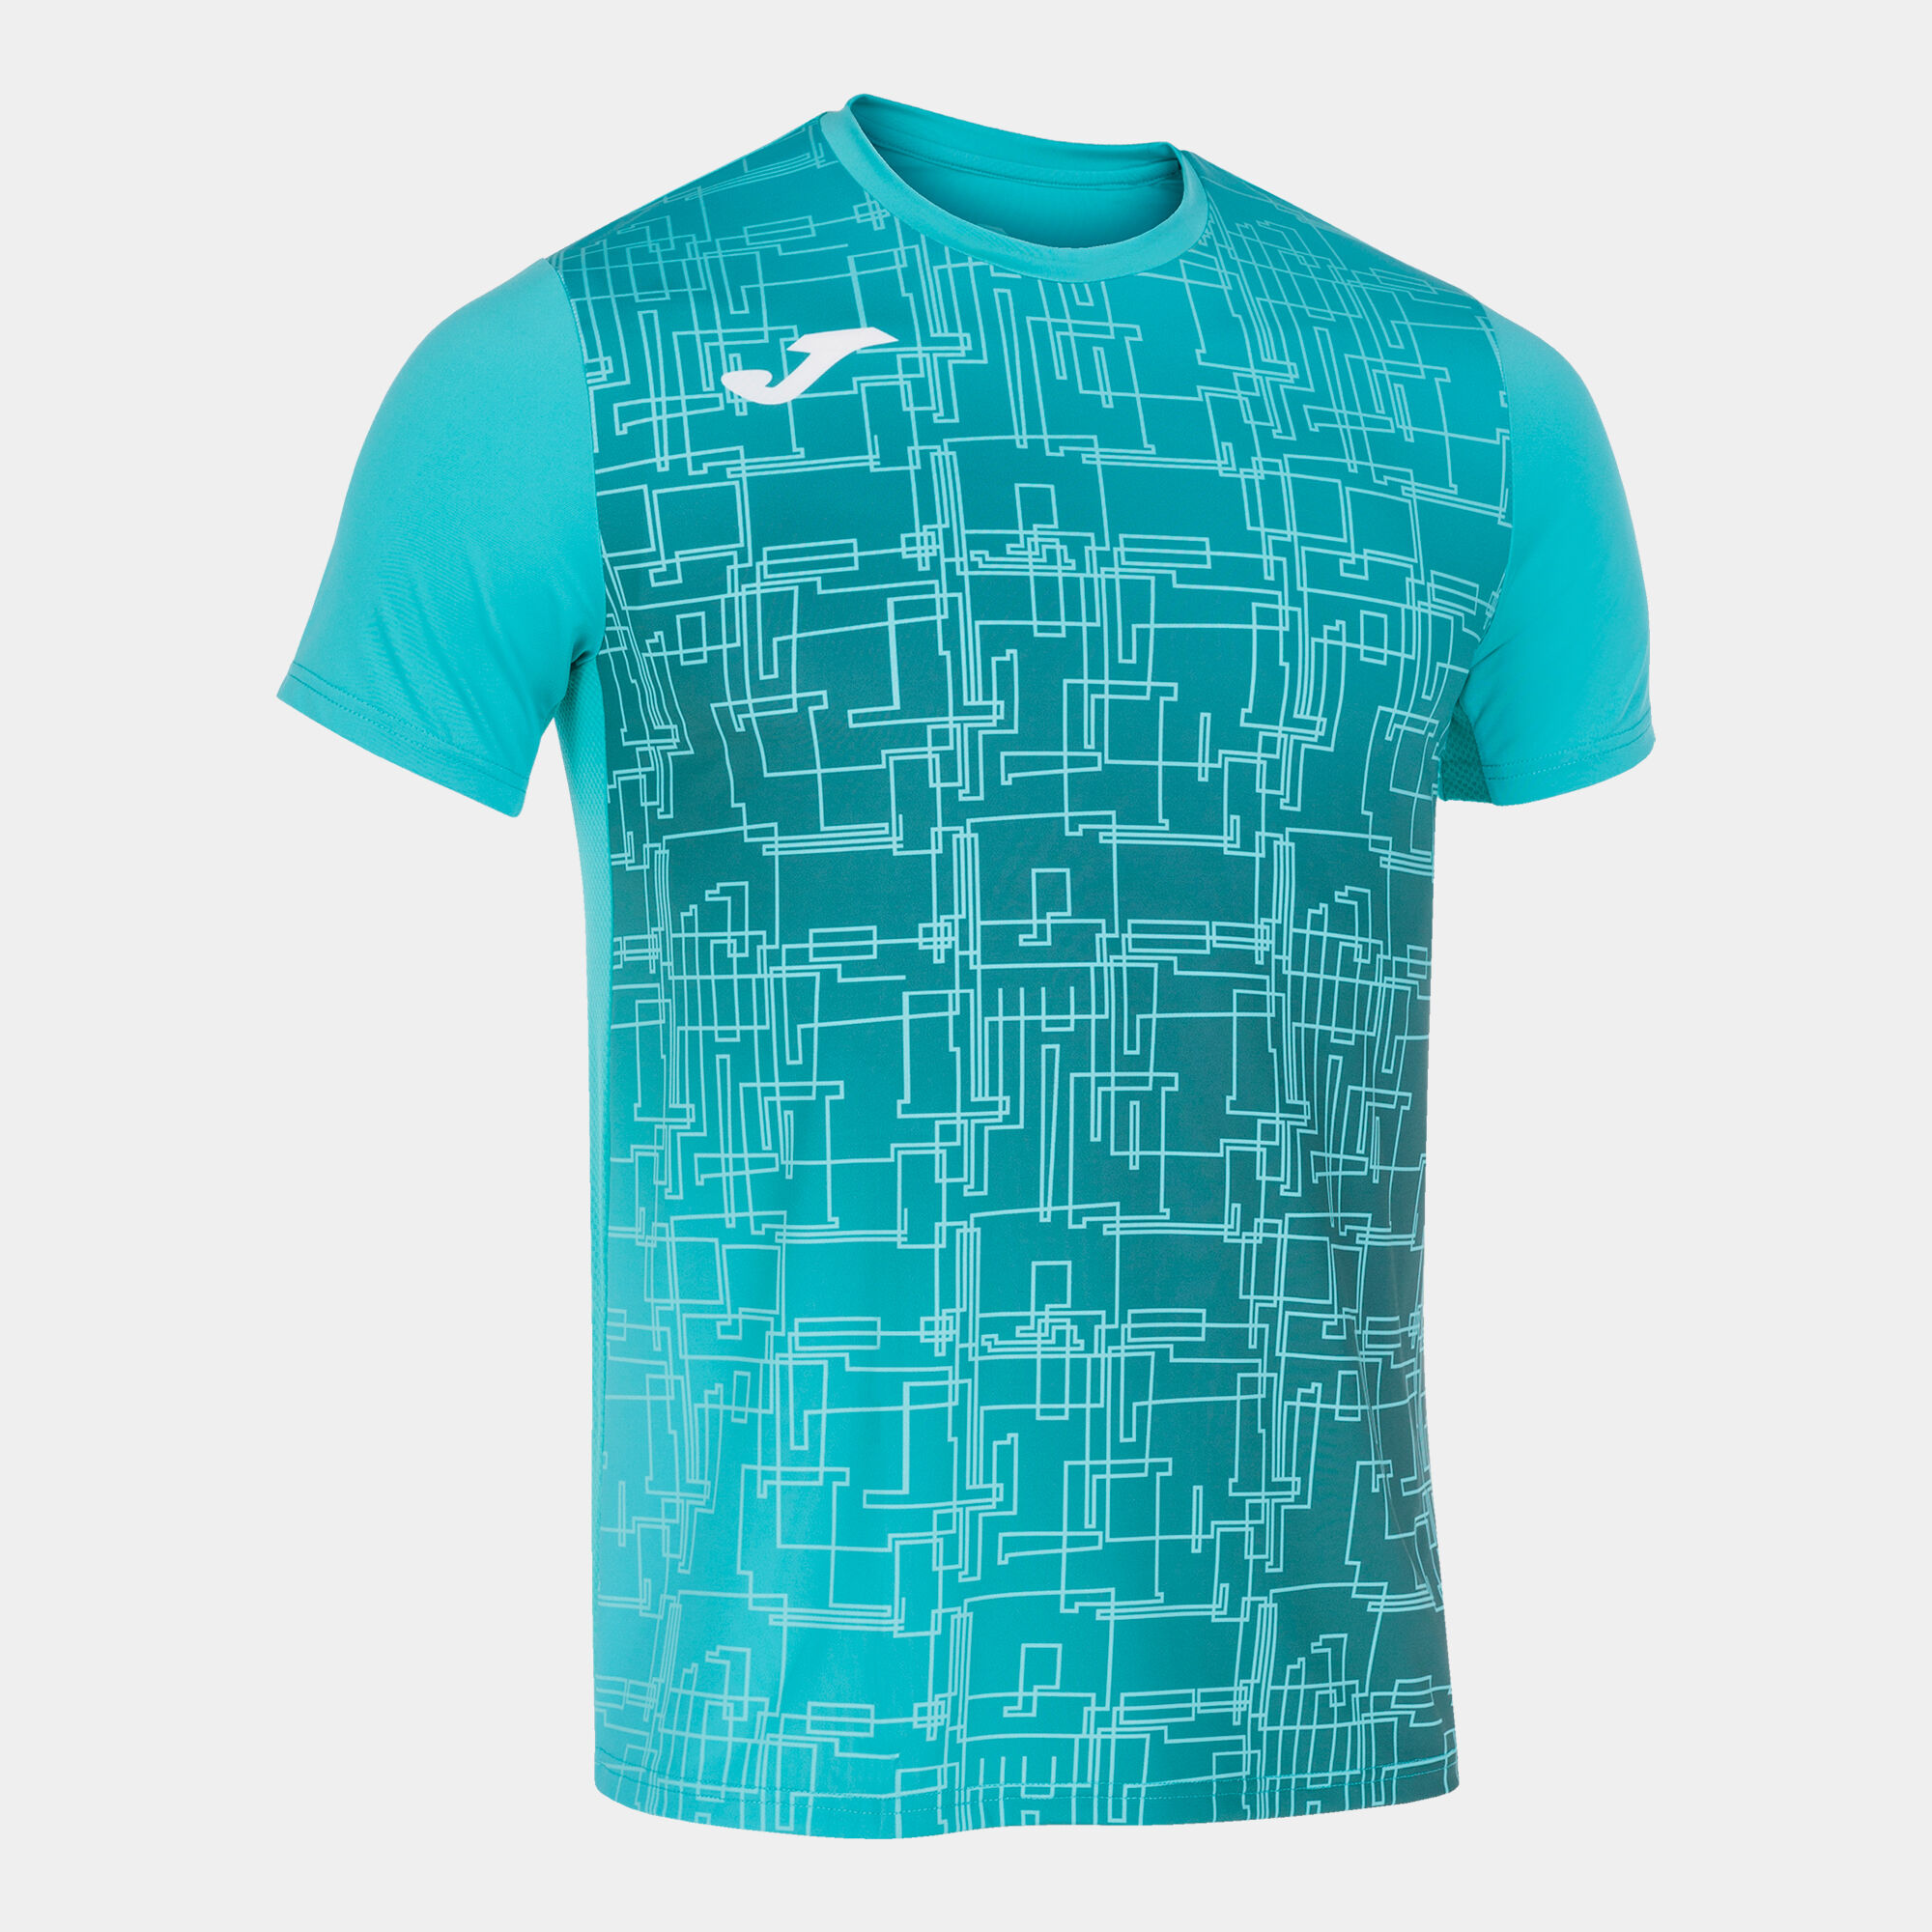 Maillot manches courtes homme Elite VIII turquoise